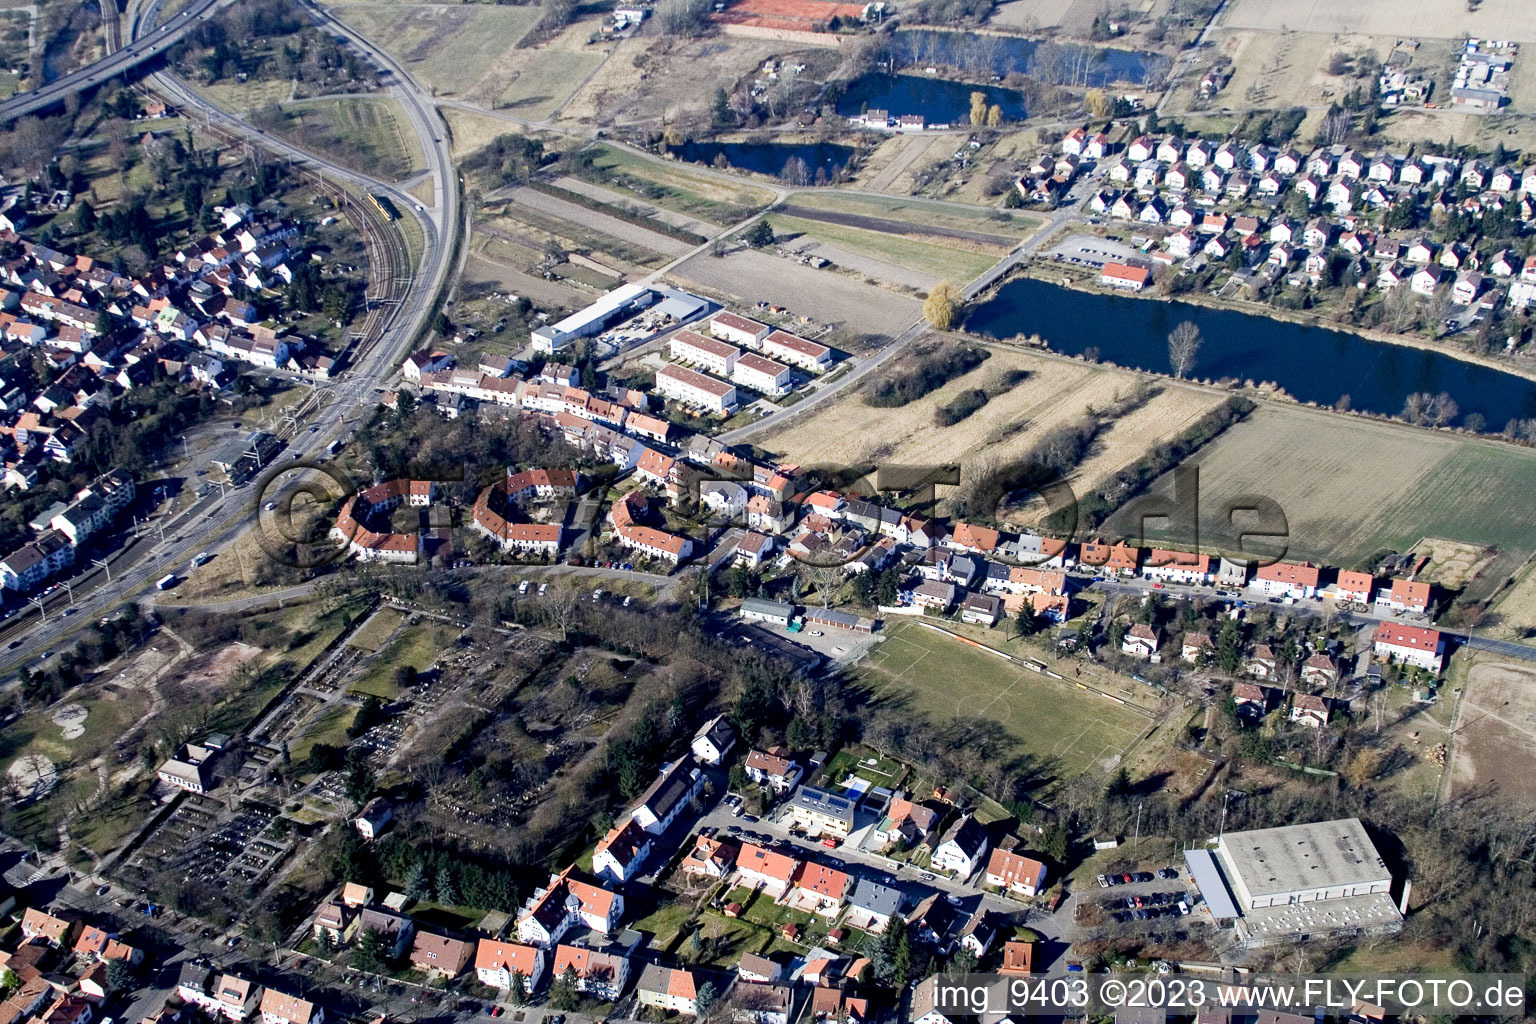 District Knielingen in Karlsruhe in the state Baden-Wuerttemberg, Germany seen from a drone